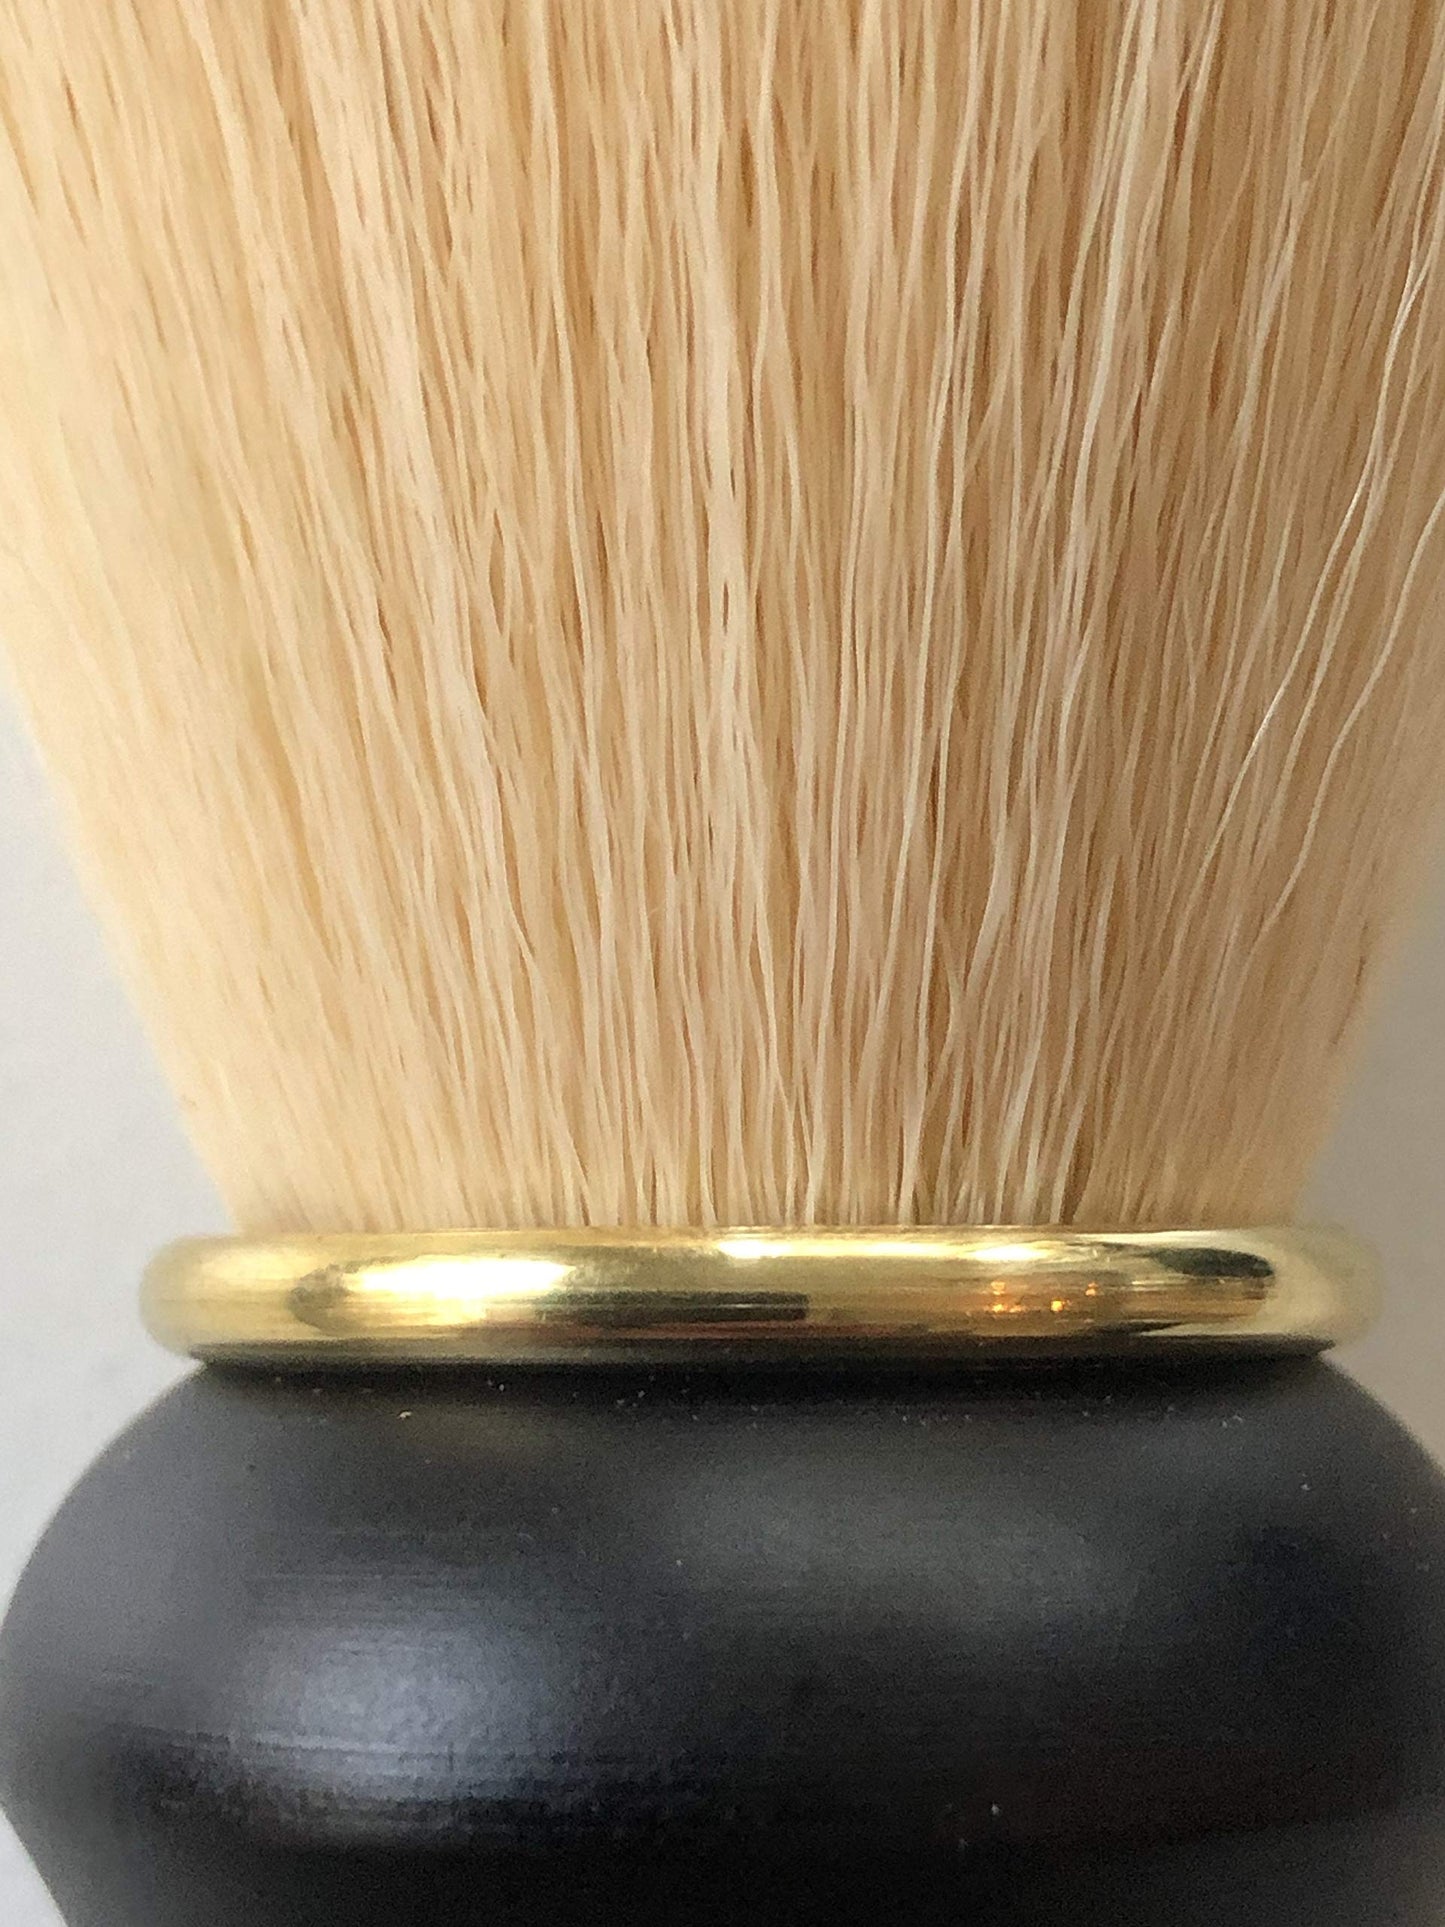 Golden Shave - Synthetic Plissoft Bristle Shave Brush with Premium Beech Handle- 24mm Knot - Gold Brass Ring -